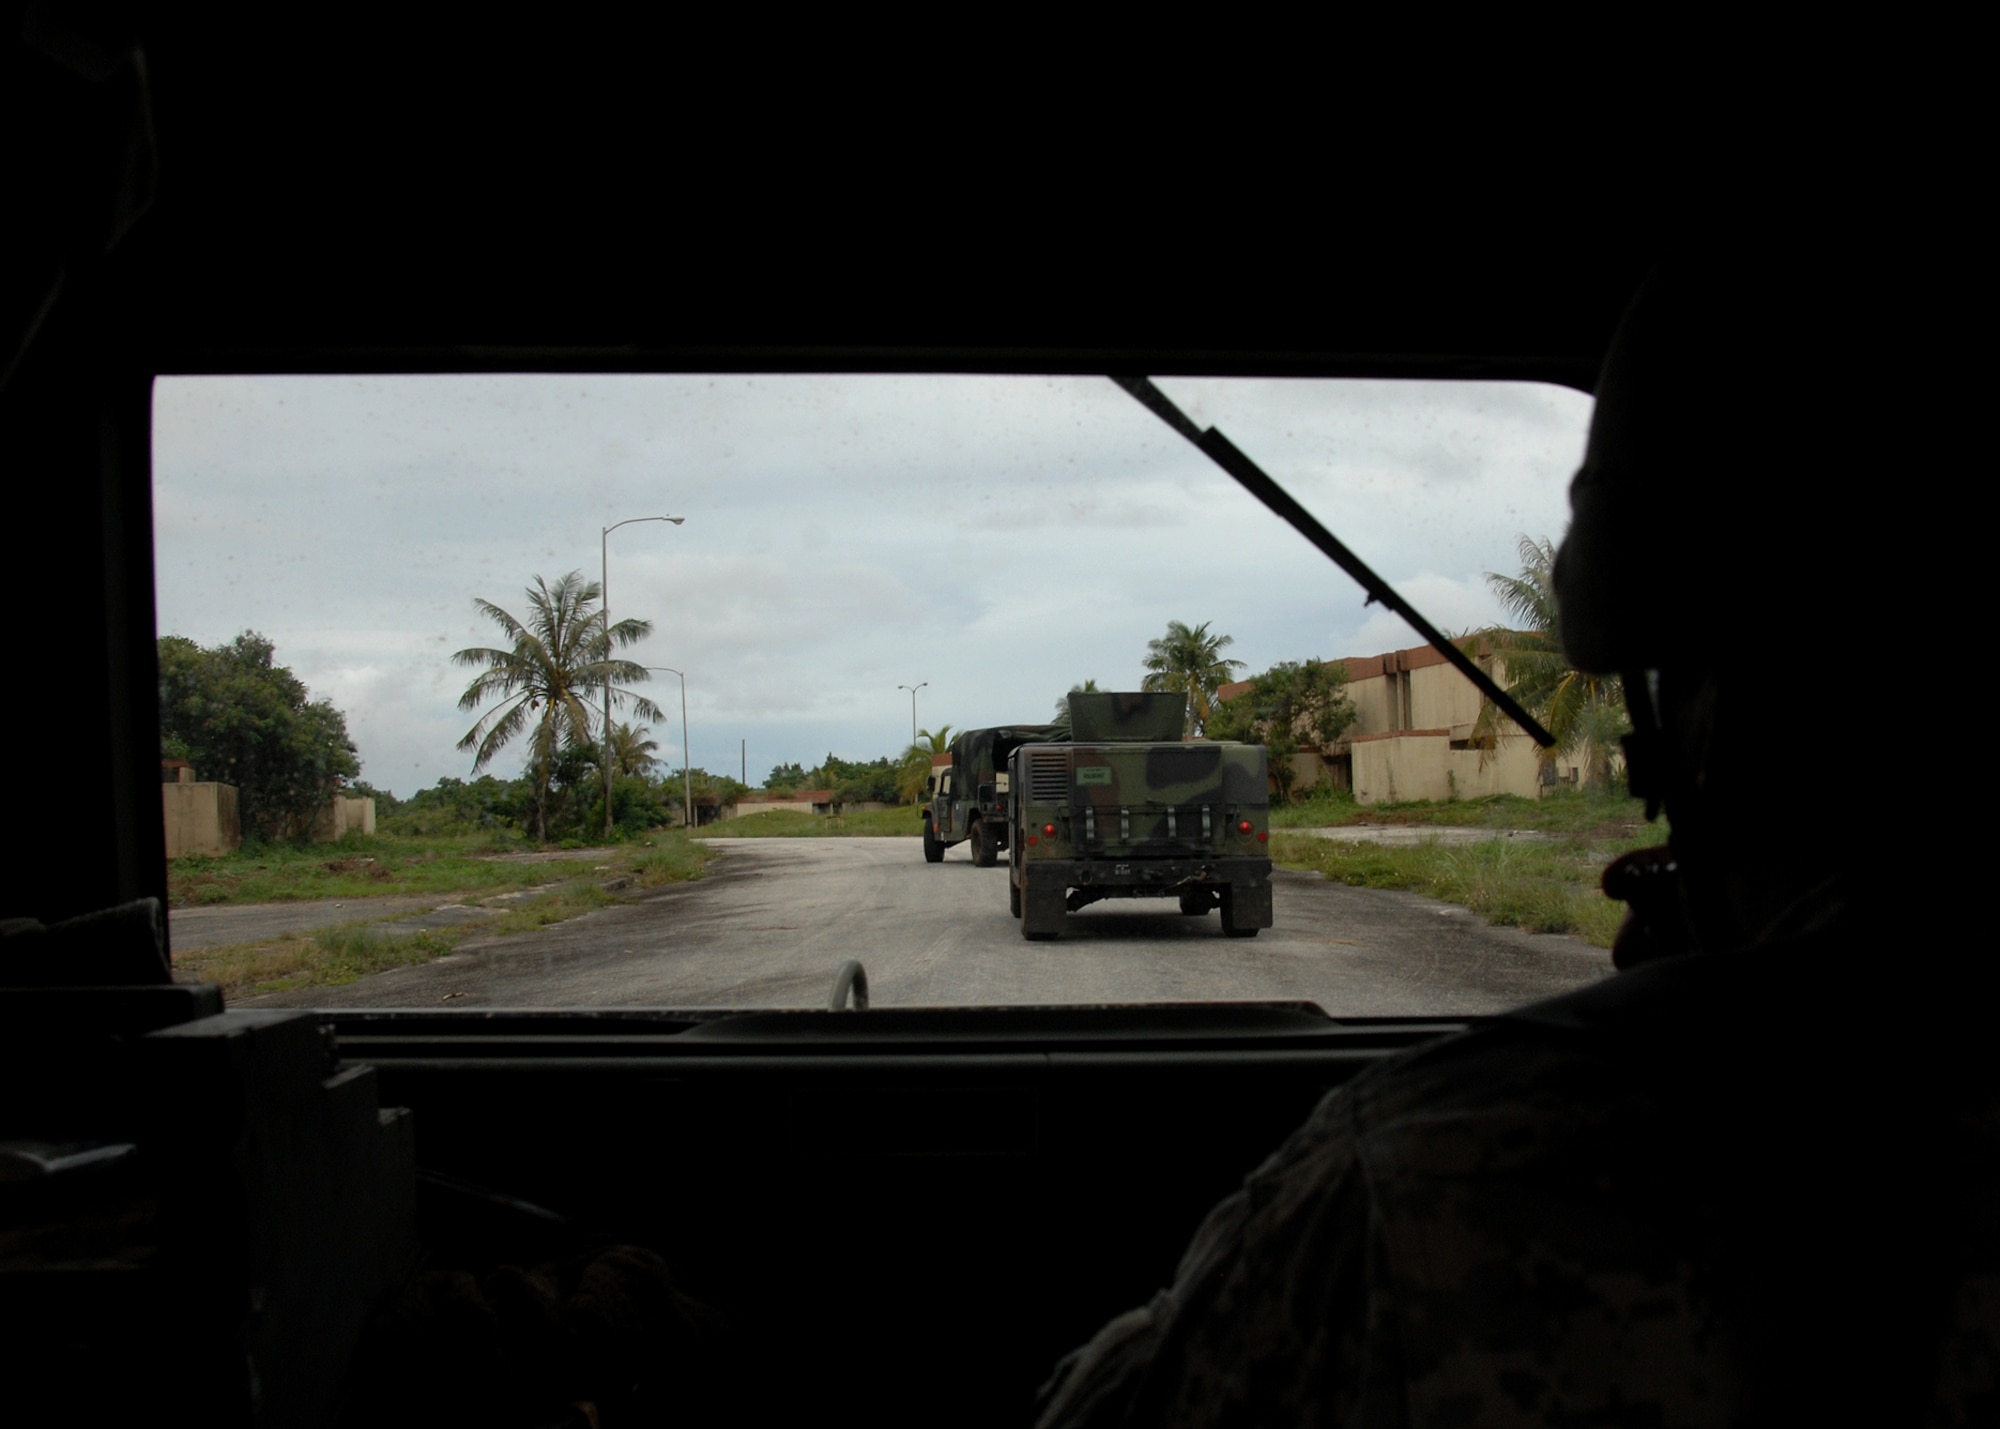 ANDERSEN AIR FORCE BASE, Guam - Members of the U.S. Air Force, U.S. Navy and the U.S. Army National Guard Guam use HUMVEES for training in tactical convoy operations for TRICRAB '08 scenarios. The Army National Guard played a vital role as site and perimeter security during all field training scenarios Sept. 14-18 at Andersen South. (U.S. Air Force photo by Airman 1st Class Nichelle Griffiths)      